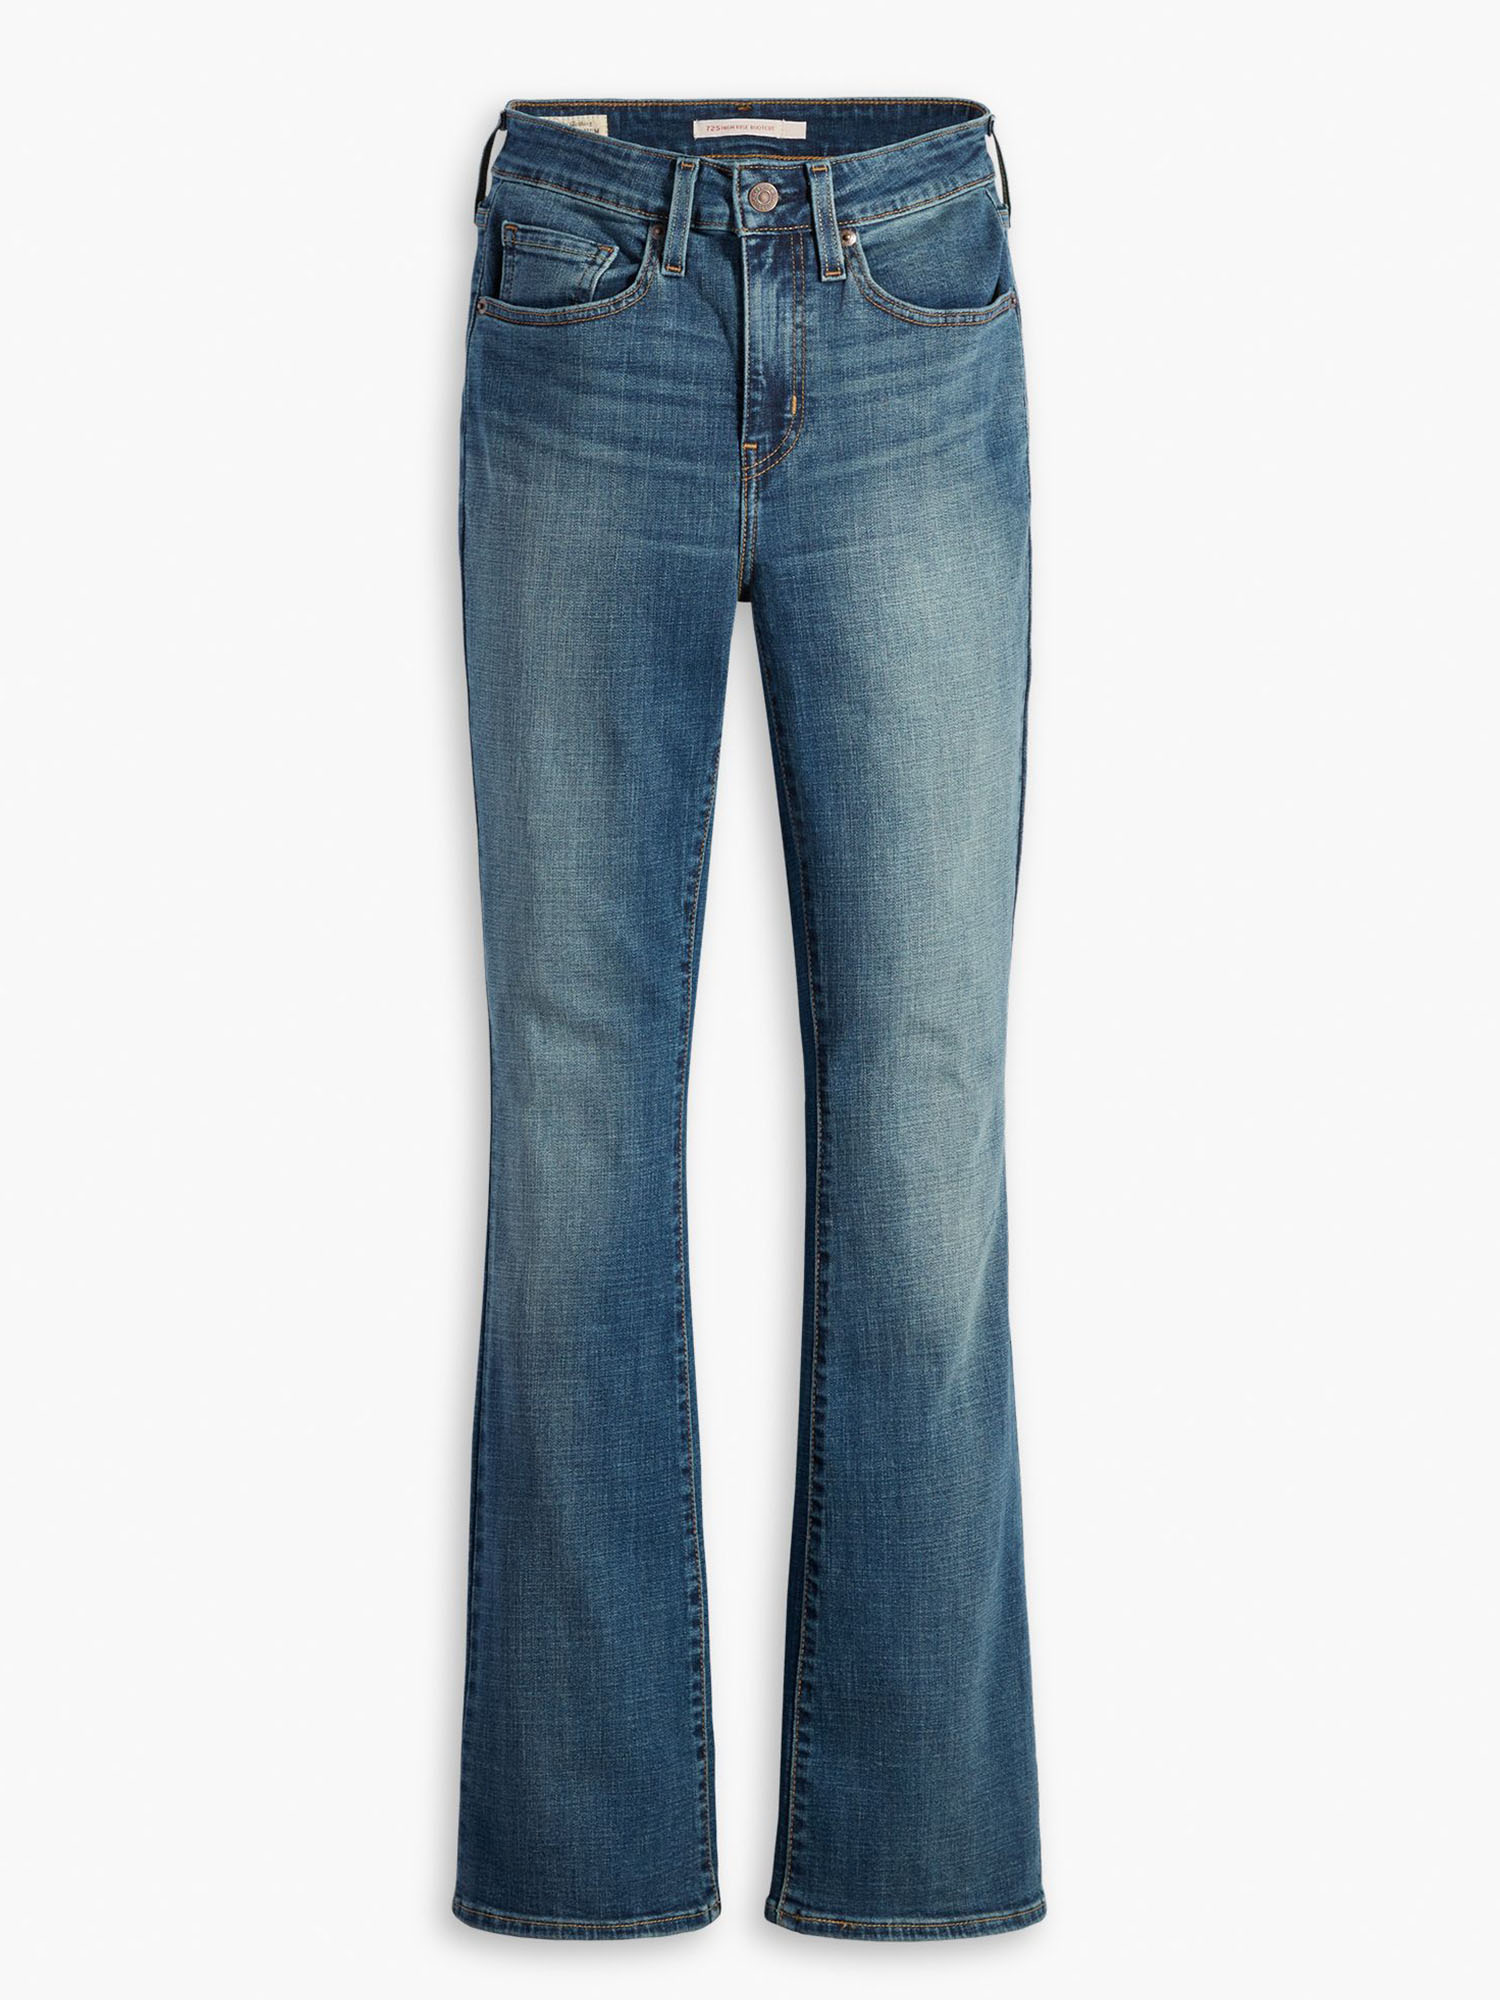 LEVI'S 725 HIGH RISE BOOTCUT - JEANS